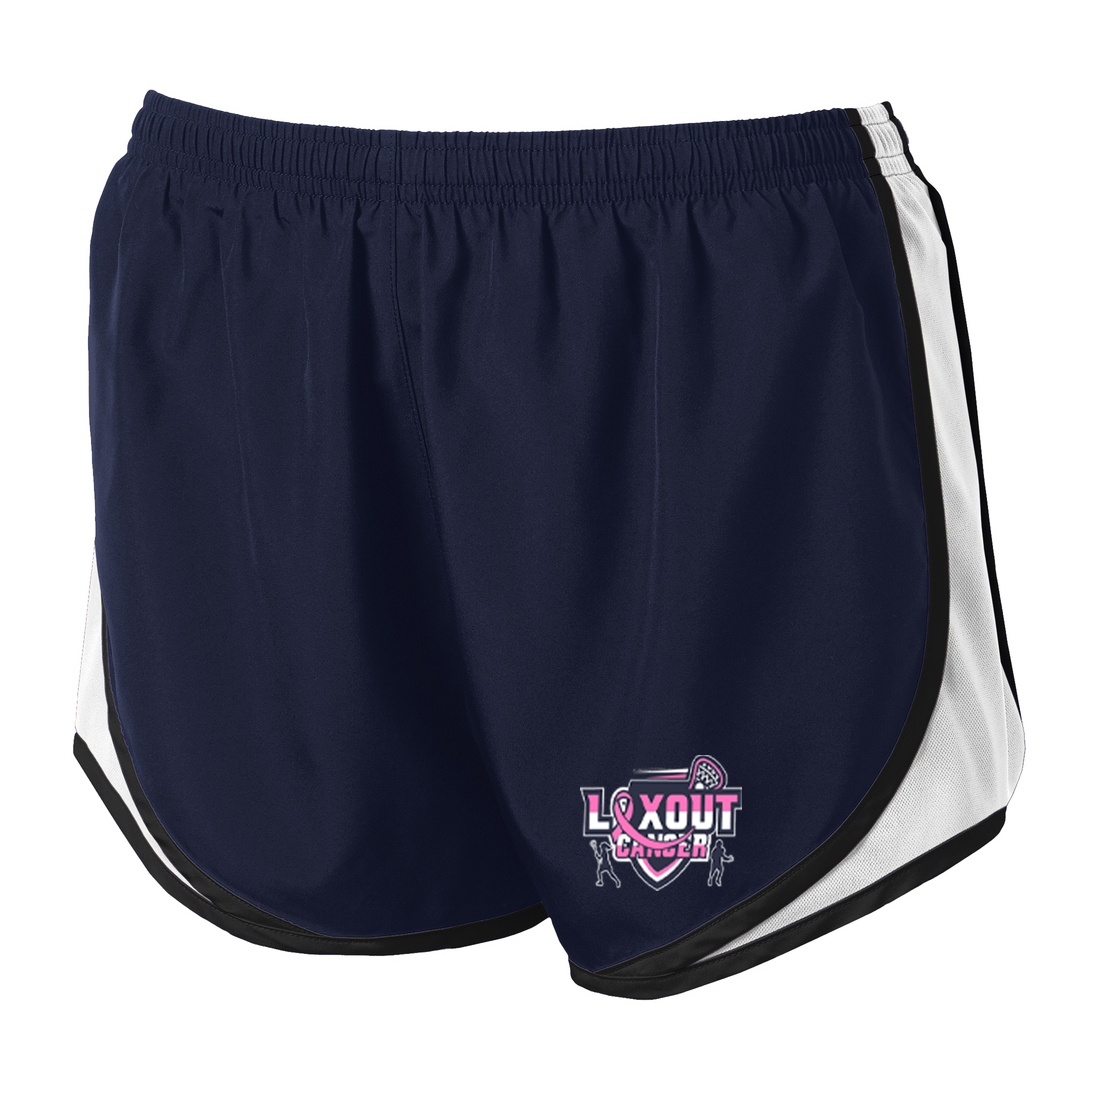 LaxOut Cancer Women's Shorts